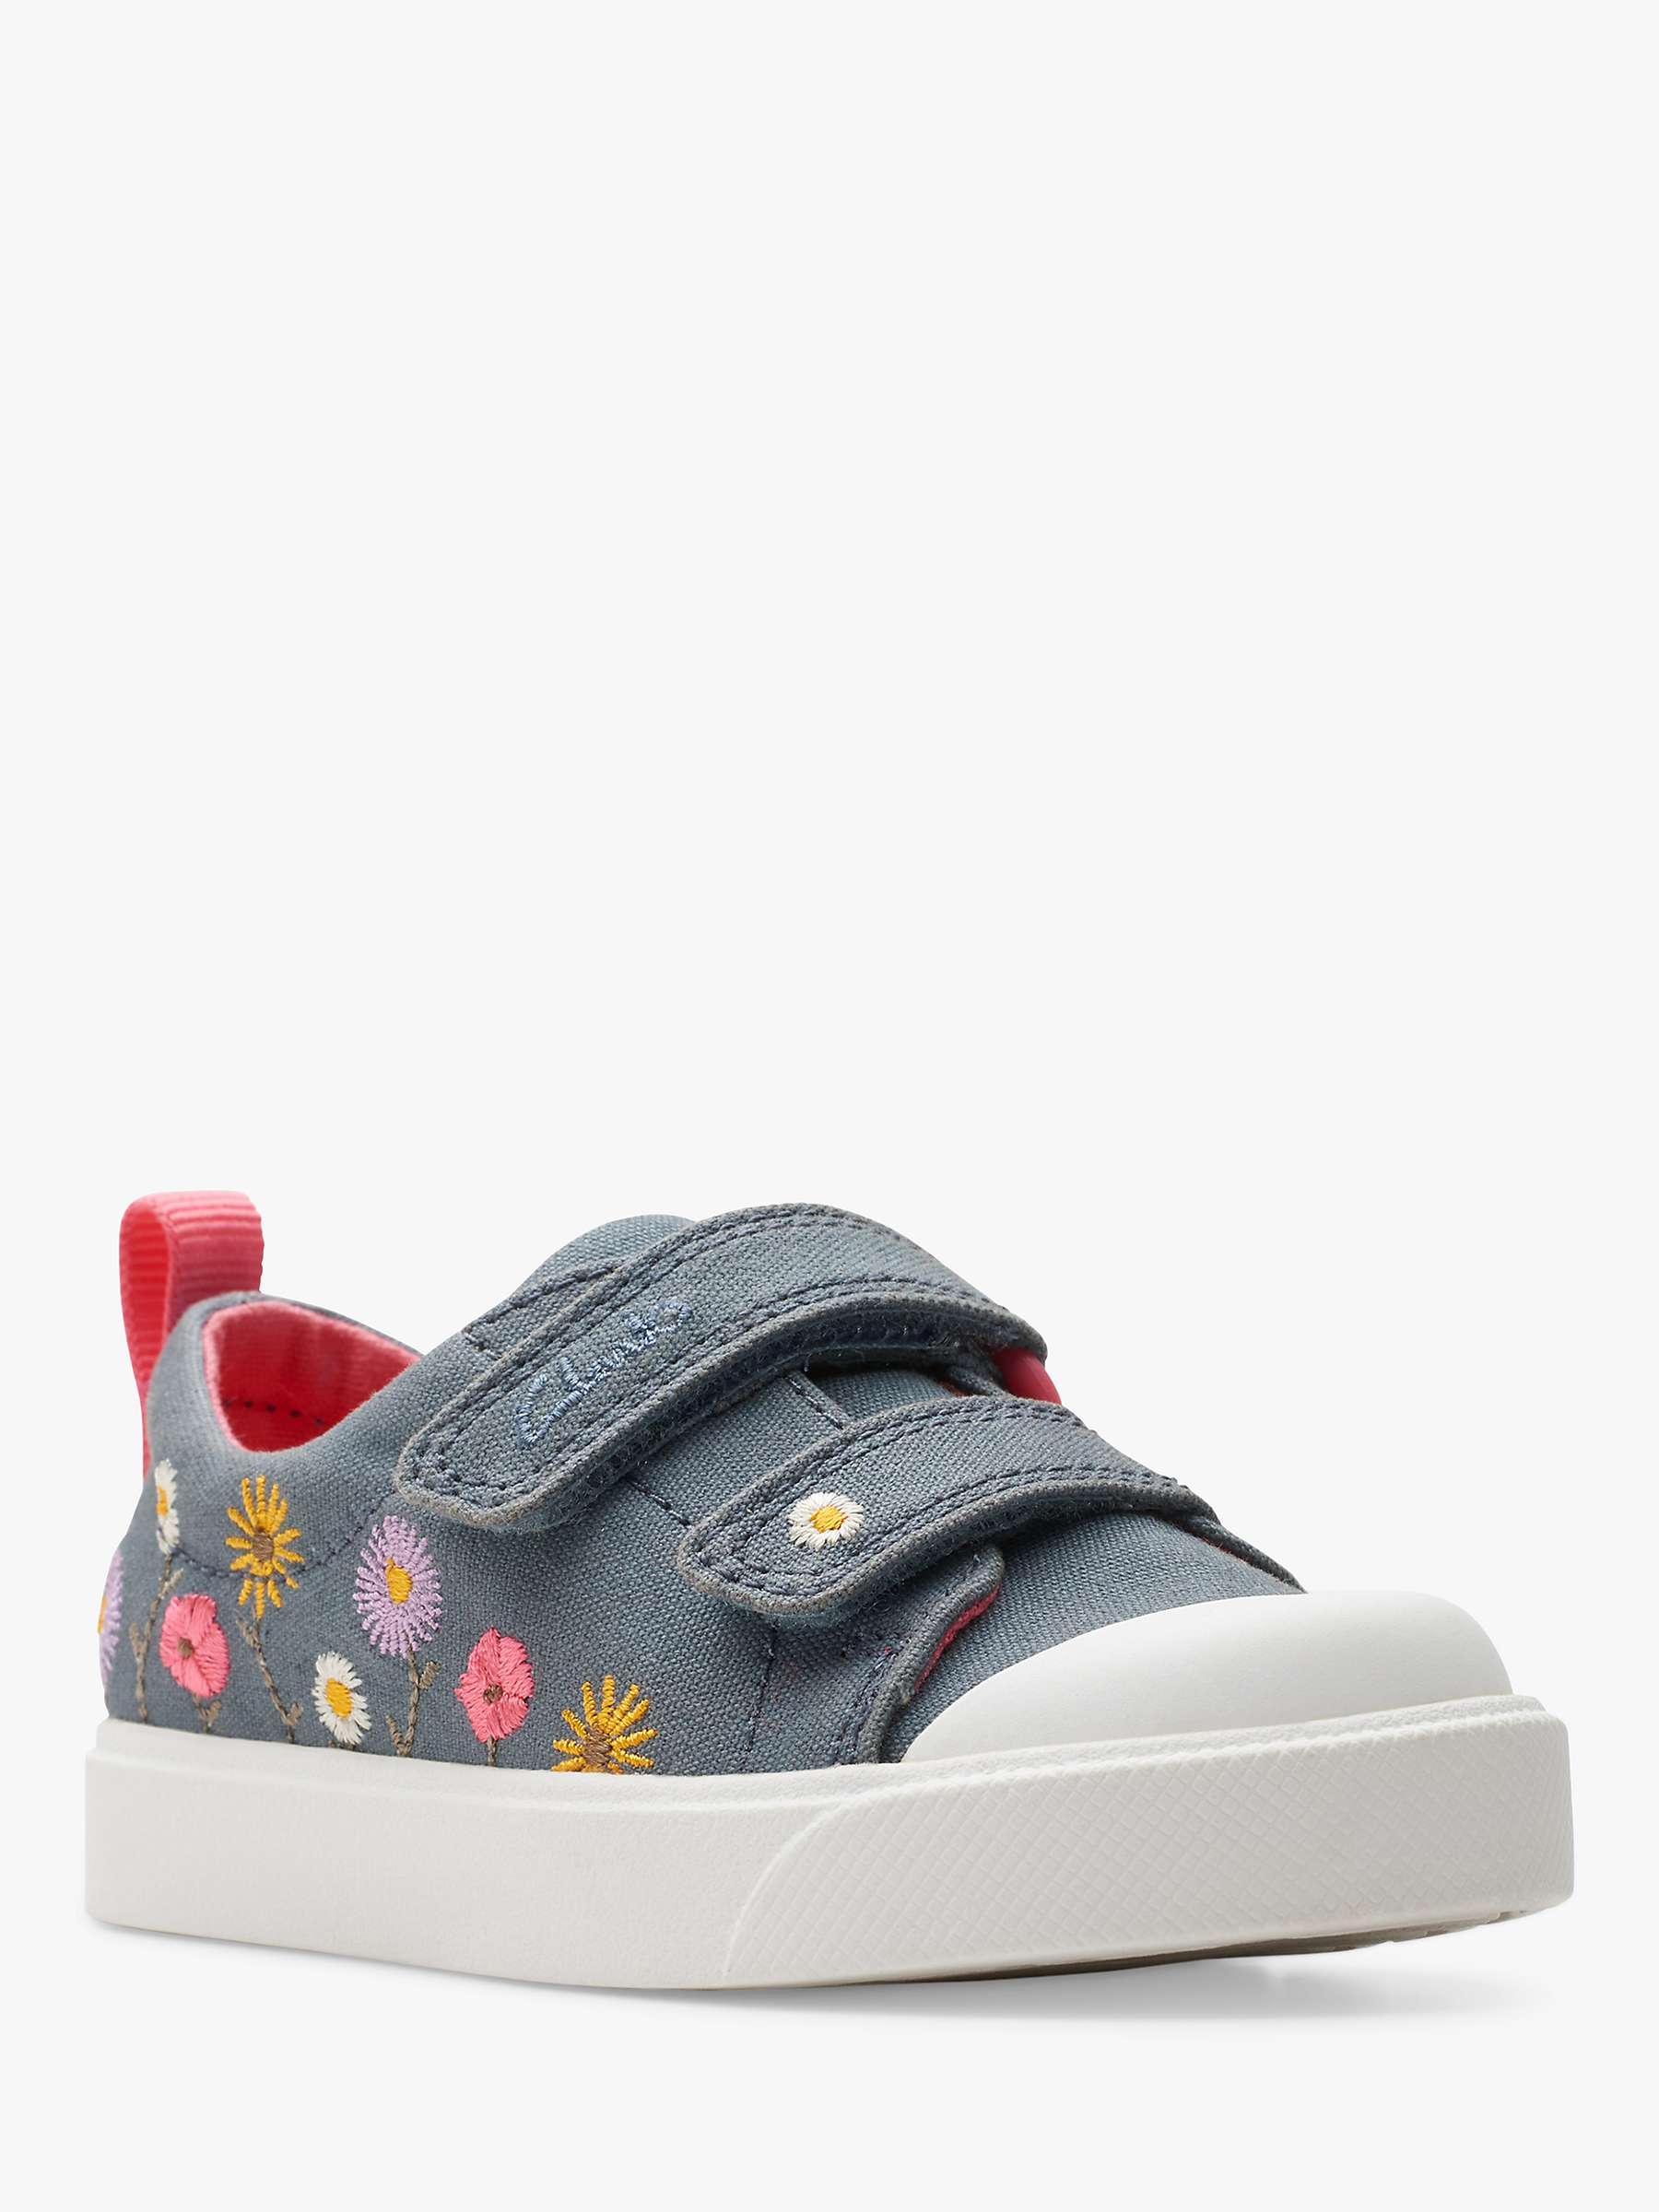 Buy Clarks Kids' City Bright Canvas Floral Embroidered Trainers, Blue Online at johnlewis.com